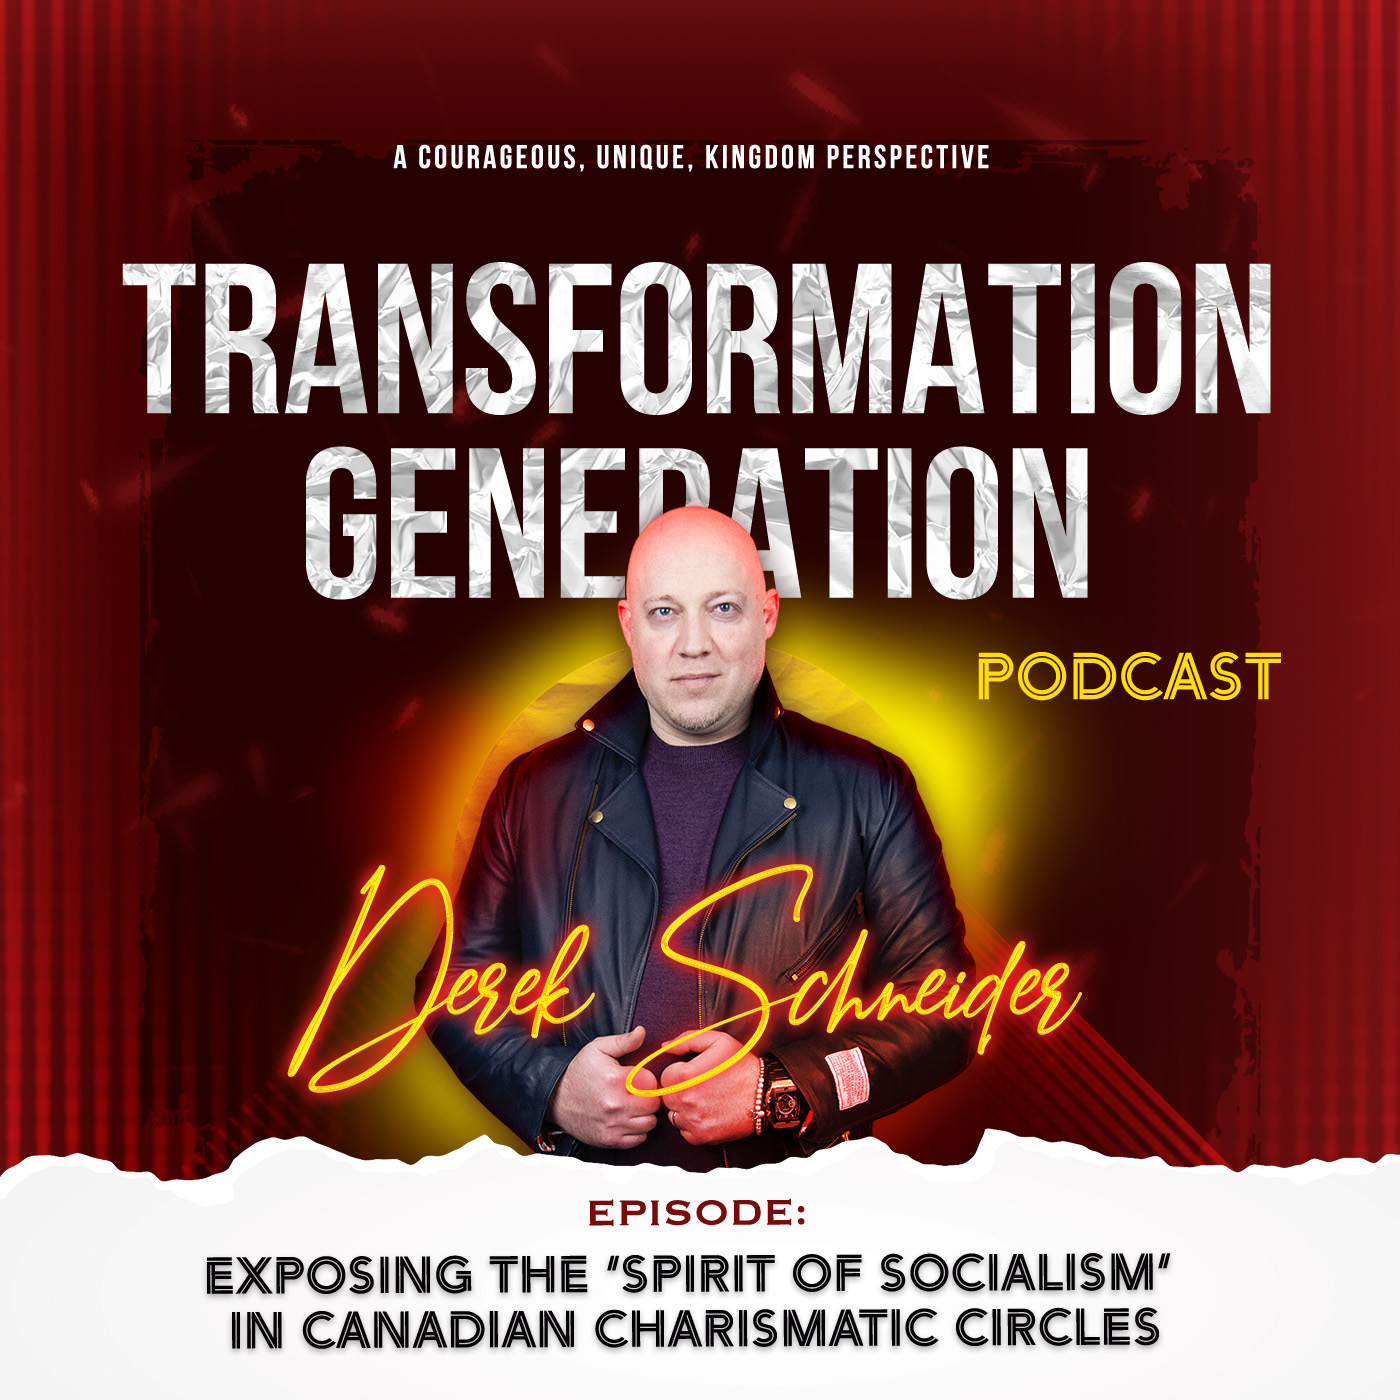 Exposing The ‘SPIRIT OF SOCIALISM’ in Canadian Charismatic Circles